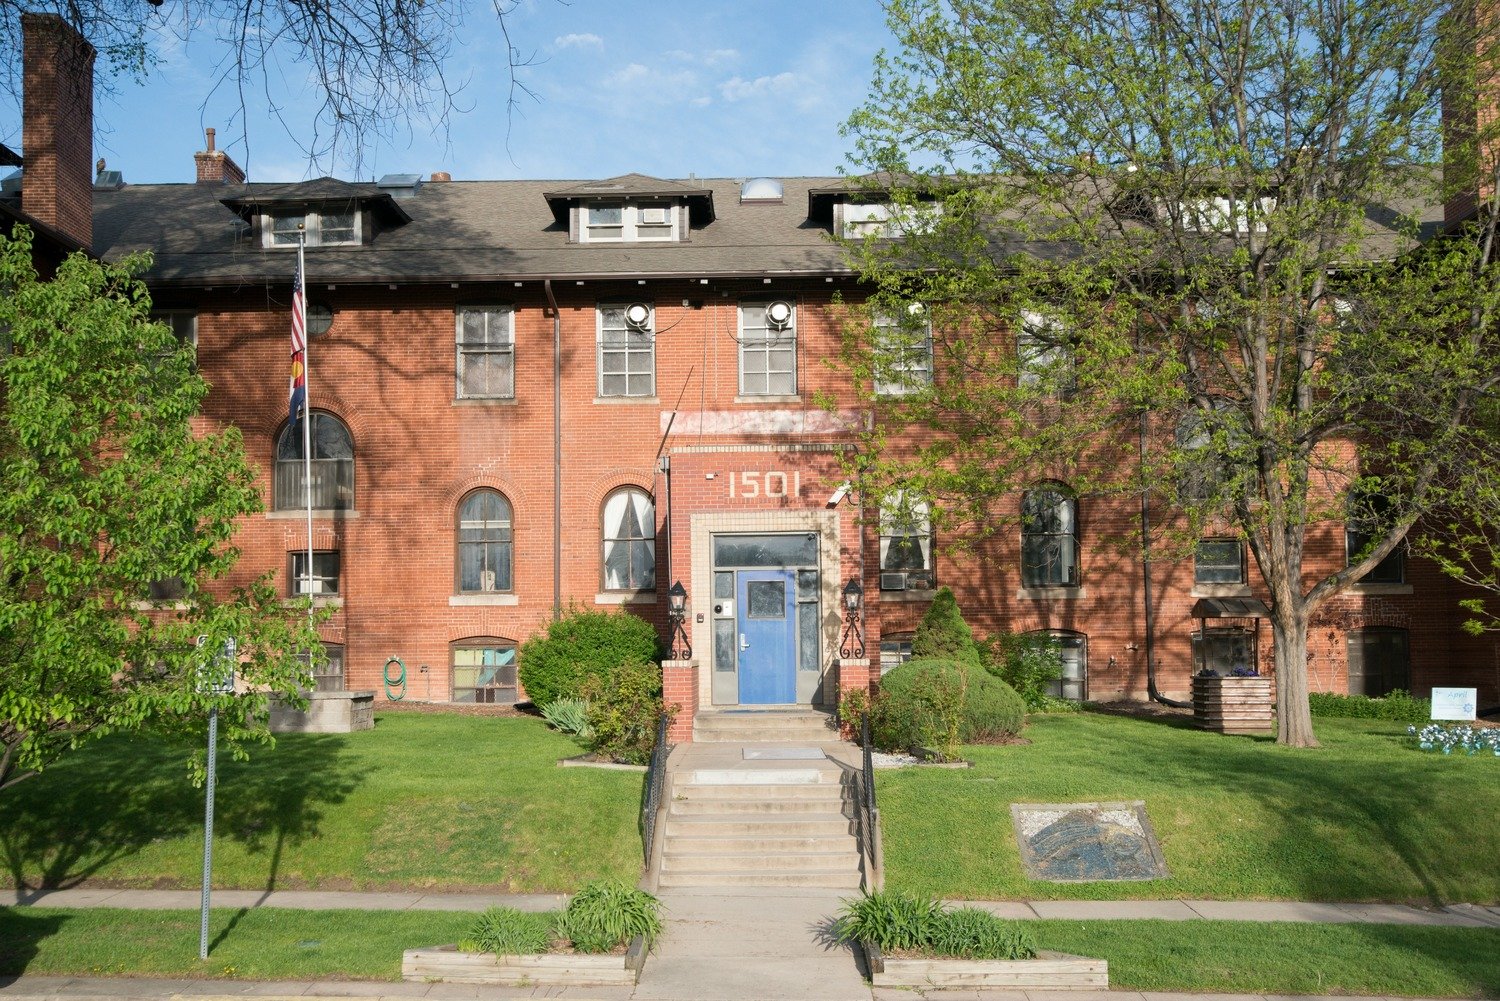 Finished in 1902, the main building is home to our Residential and Day Treatment Programs as well as the Bansbach Academy.